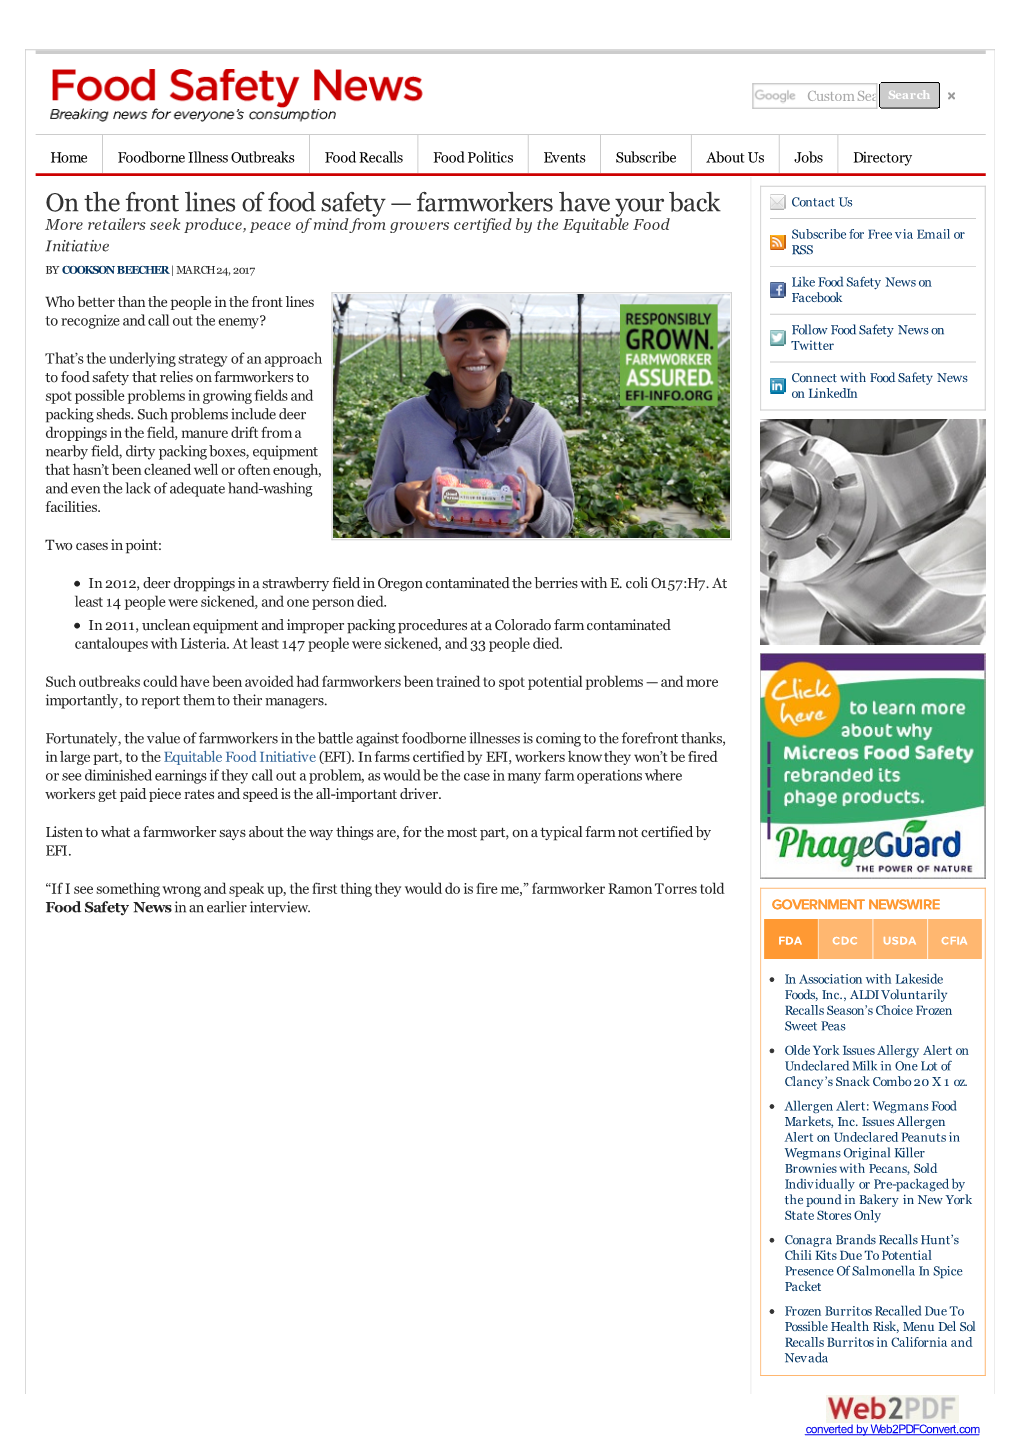 Farmworkers Have Your Back | Food Safety News